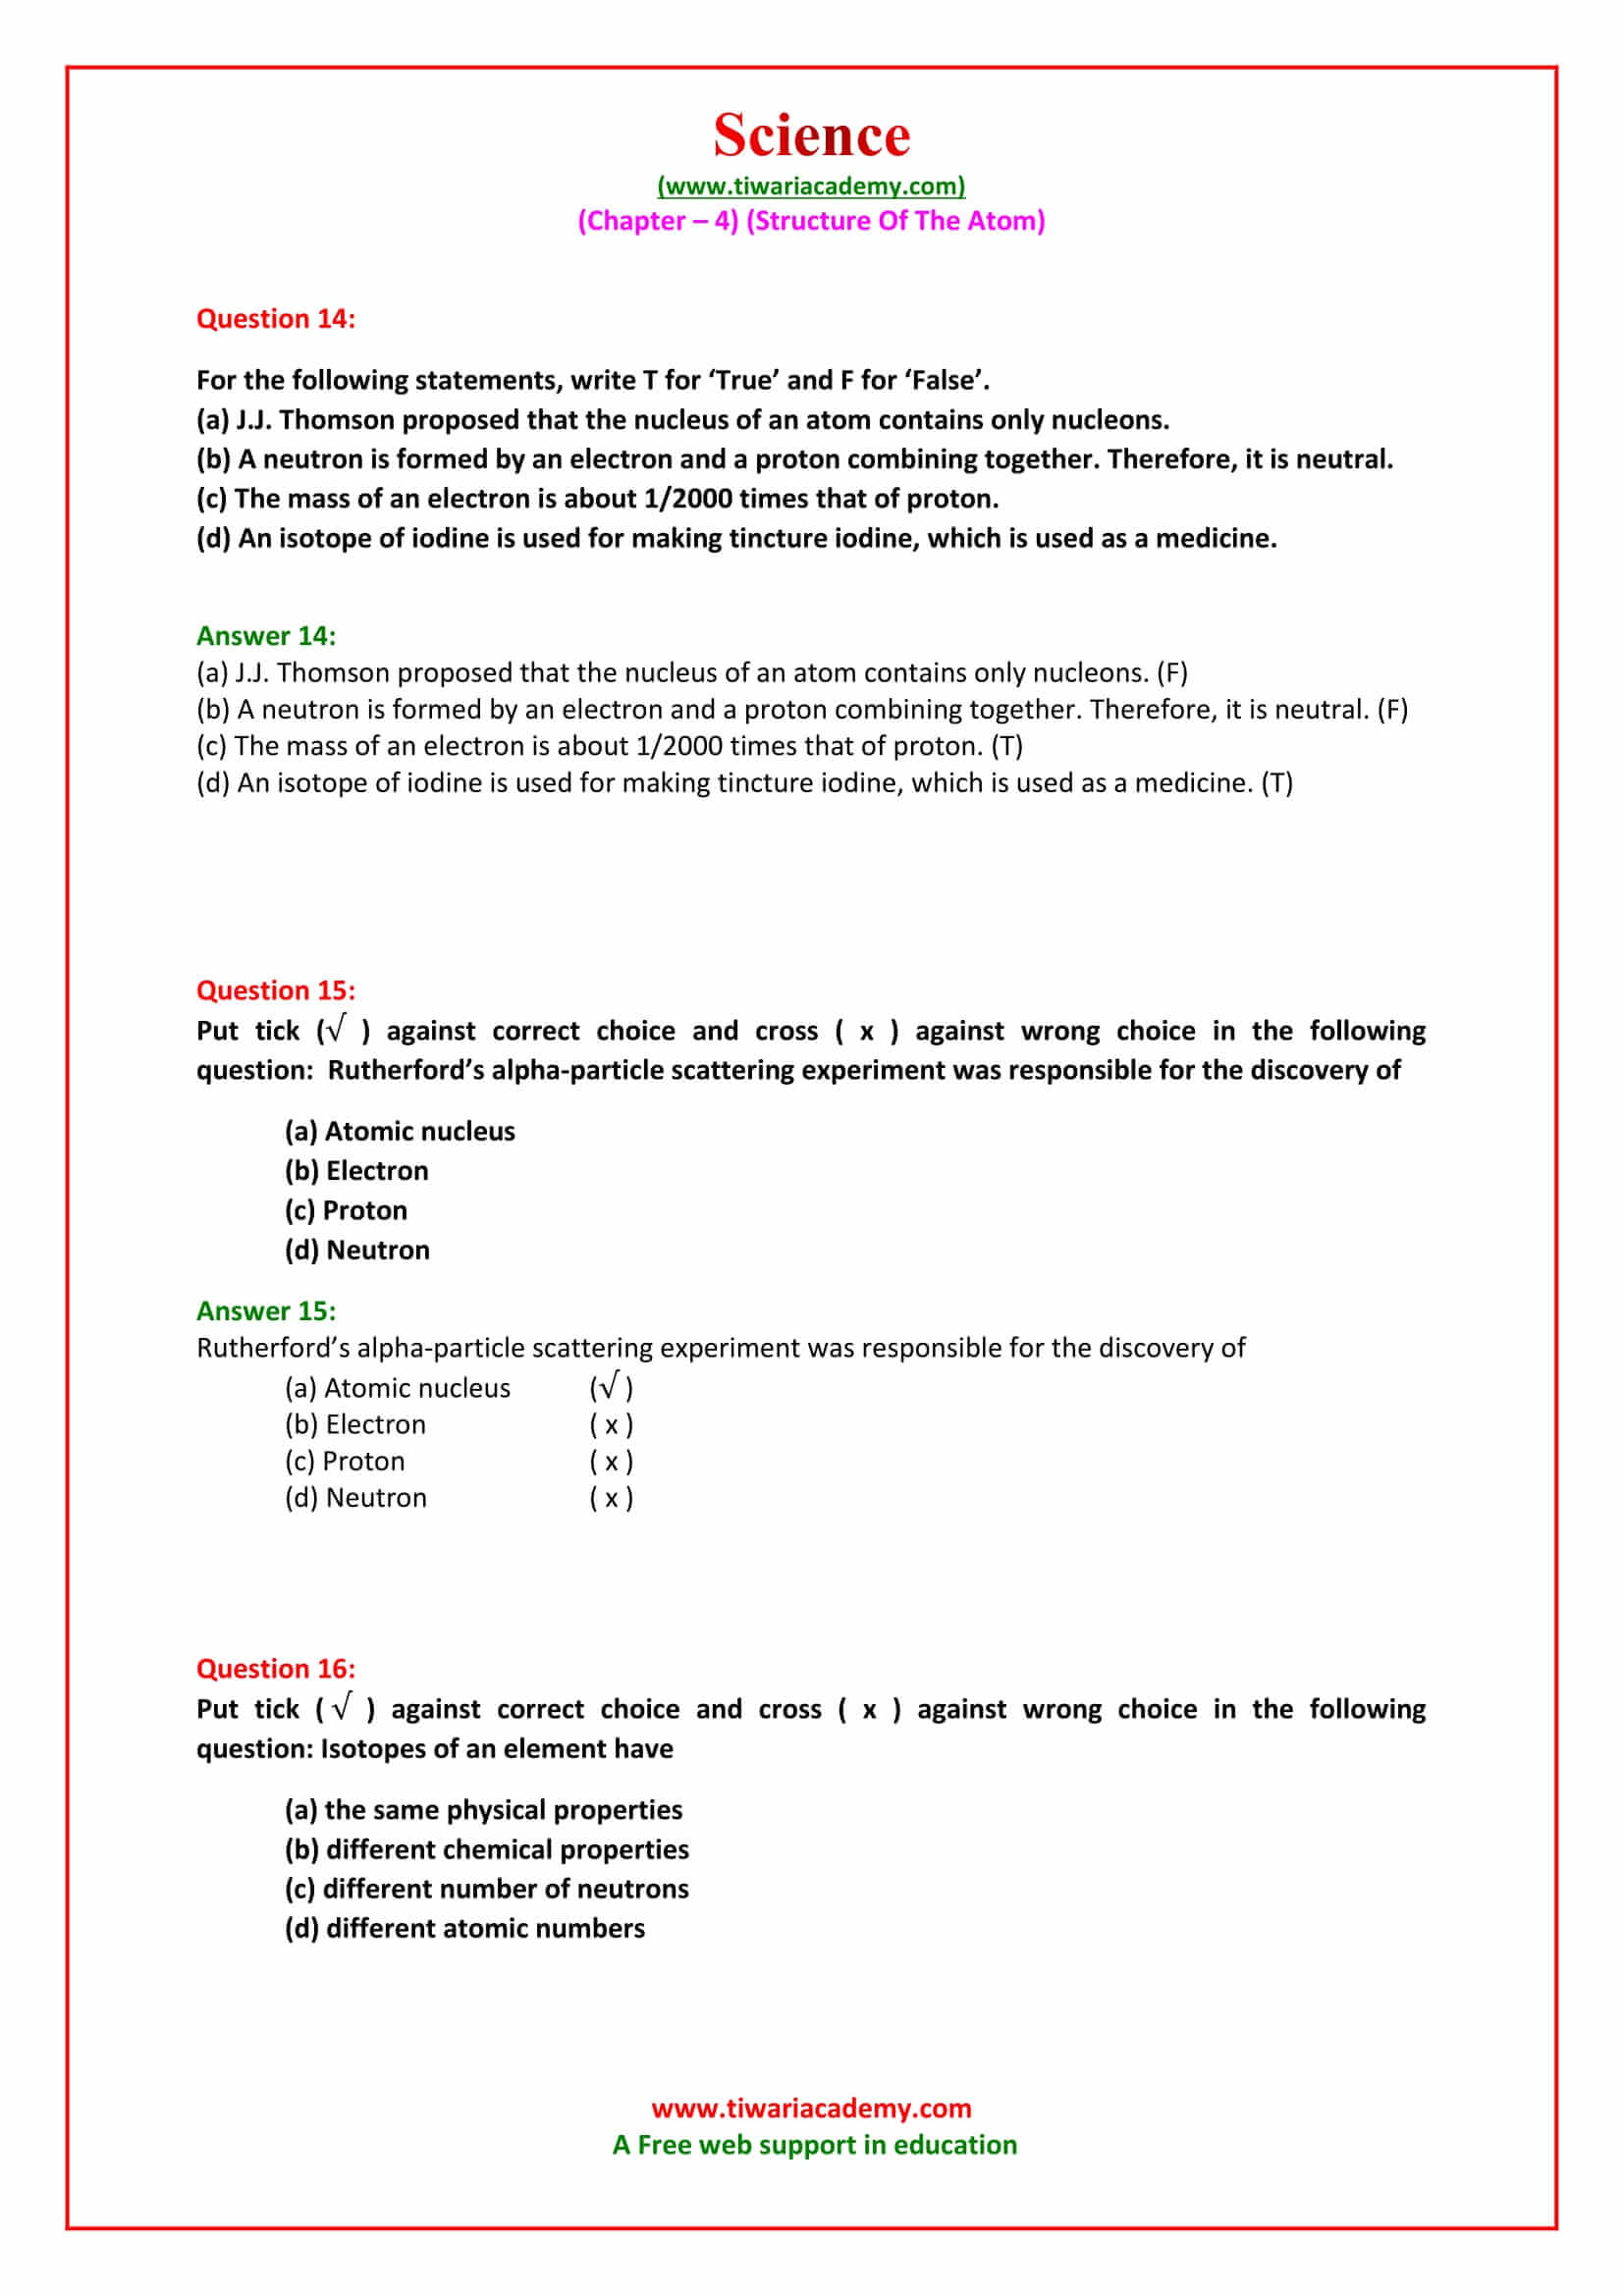 9 Science Chapter 4 Structure of the Atom Exercises Solutions in english medium